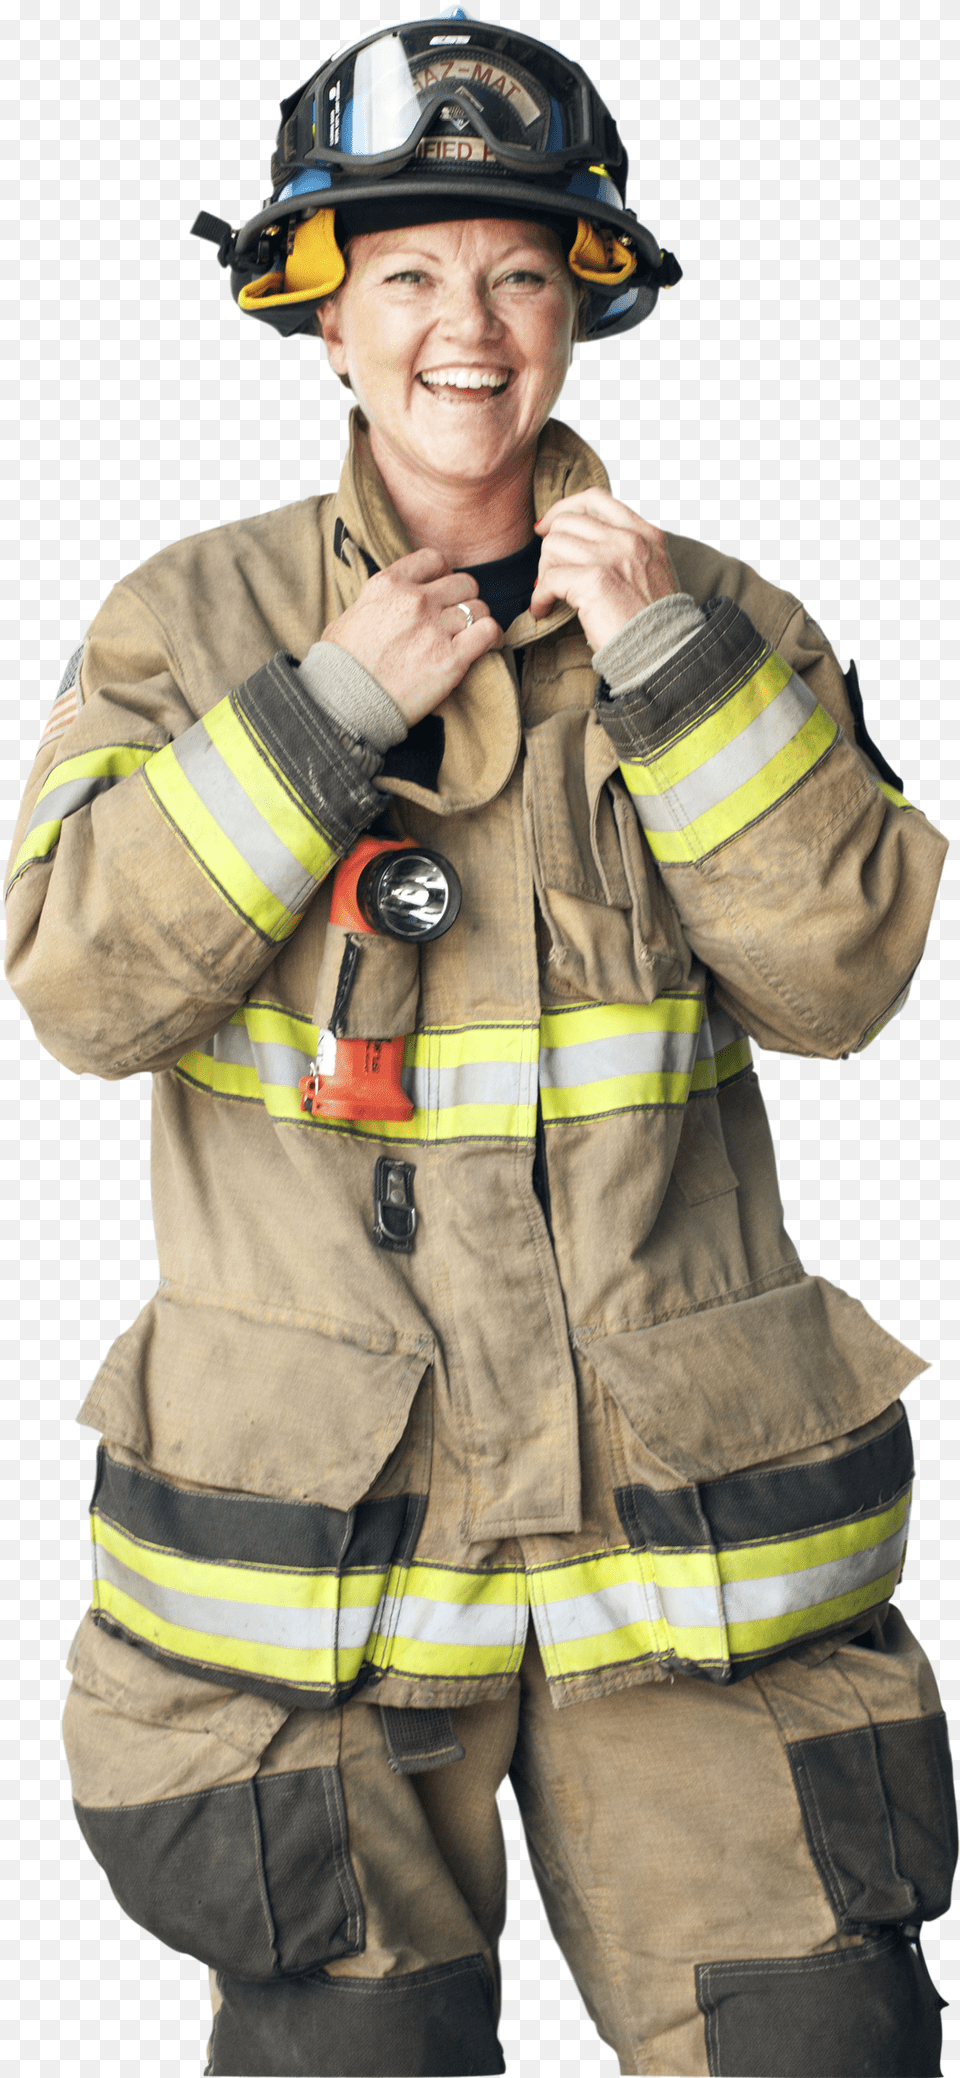 Firefighter Image Firefighter Background, Adult, Male, Man, Person Png